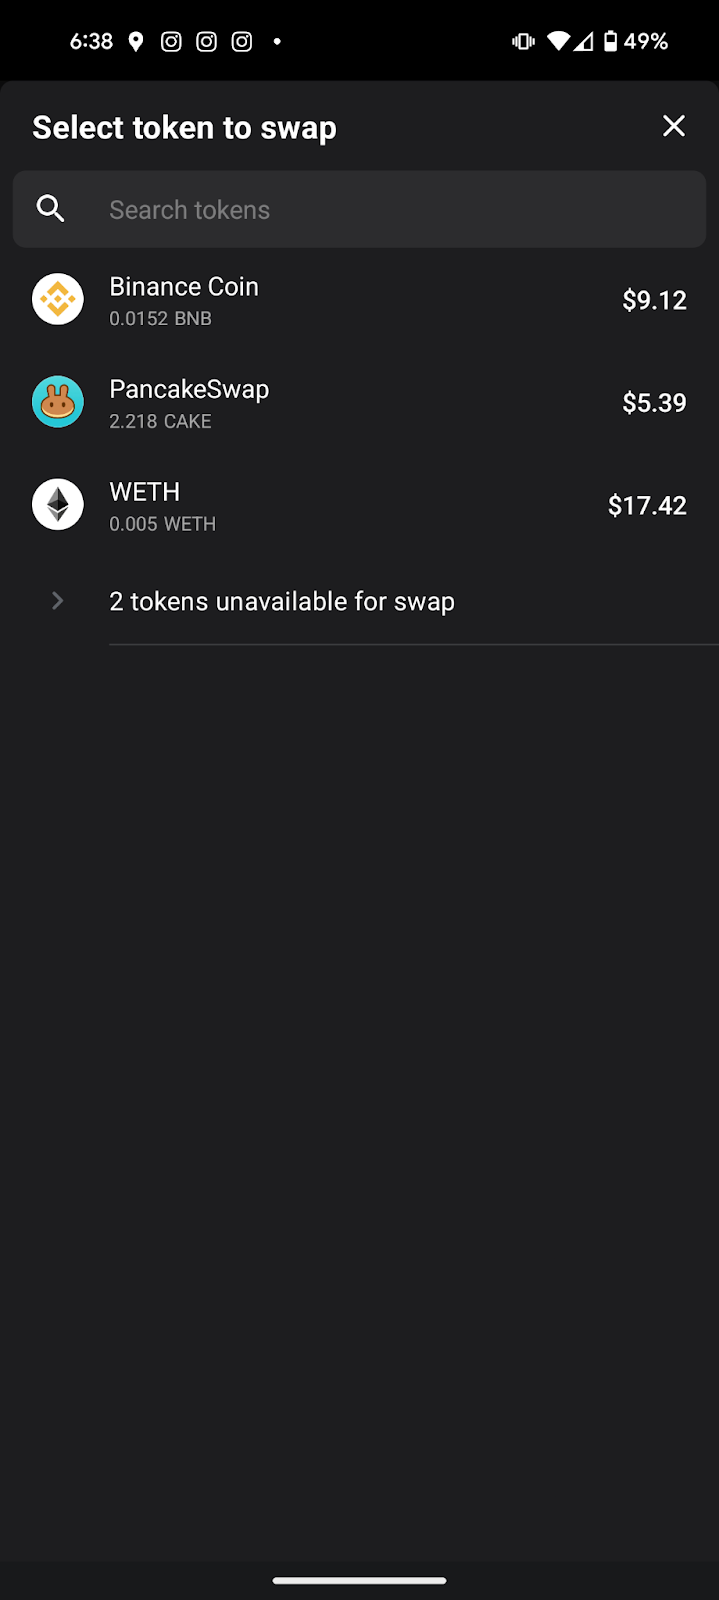 Swapping on BNB Smart Chain with MEW Mobile